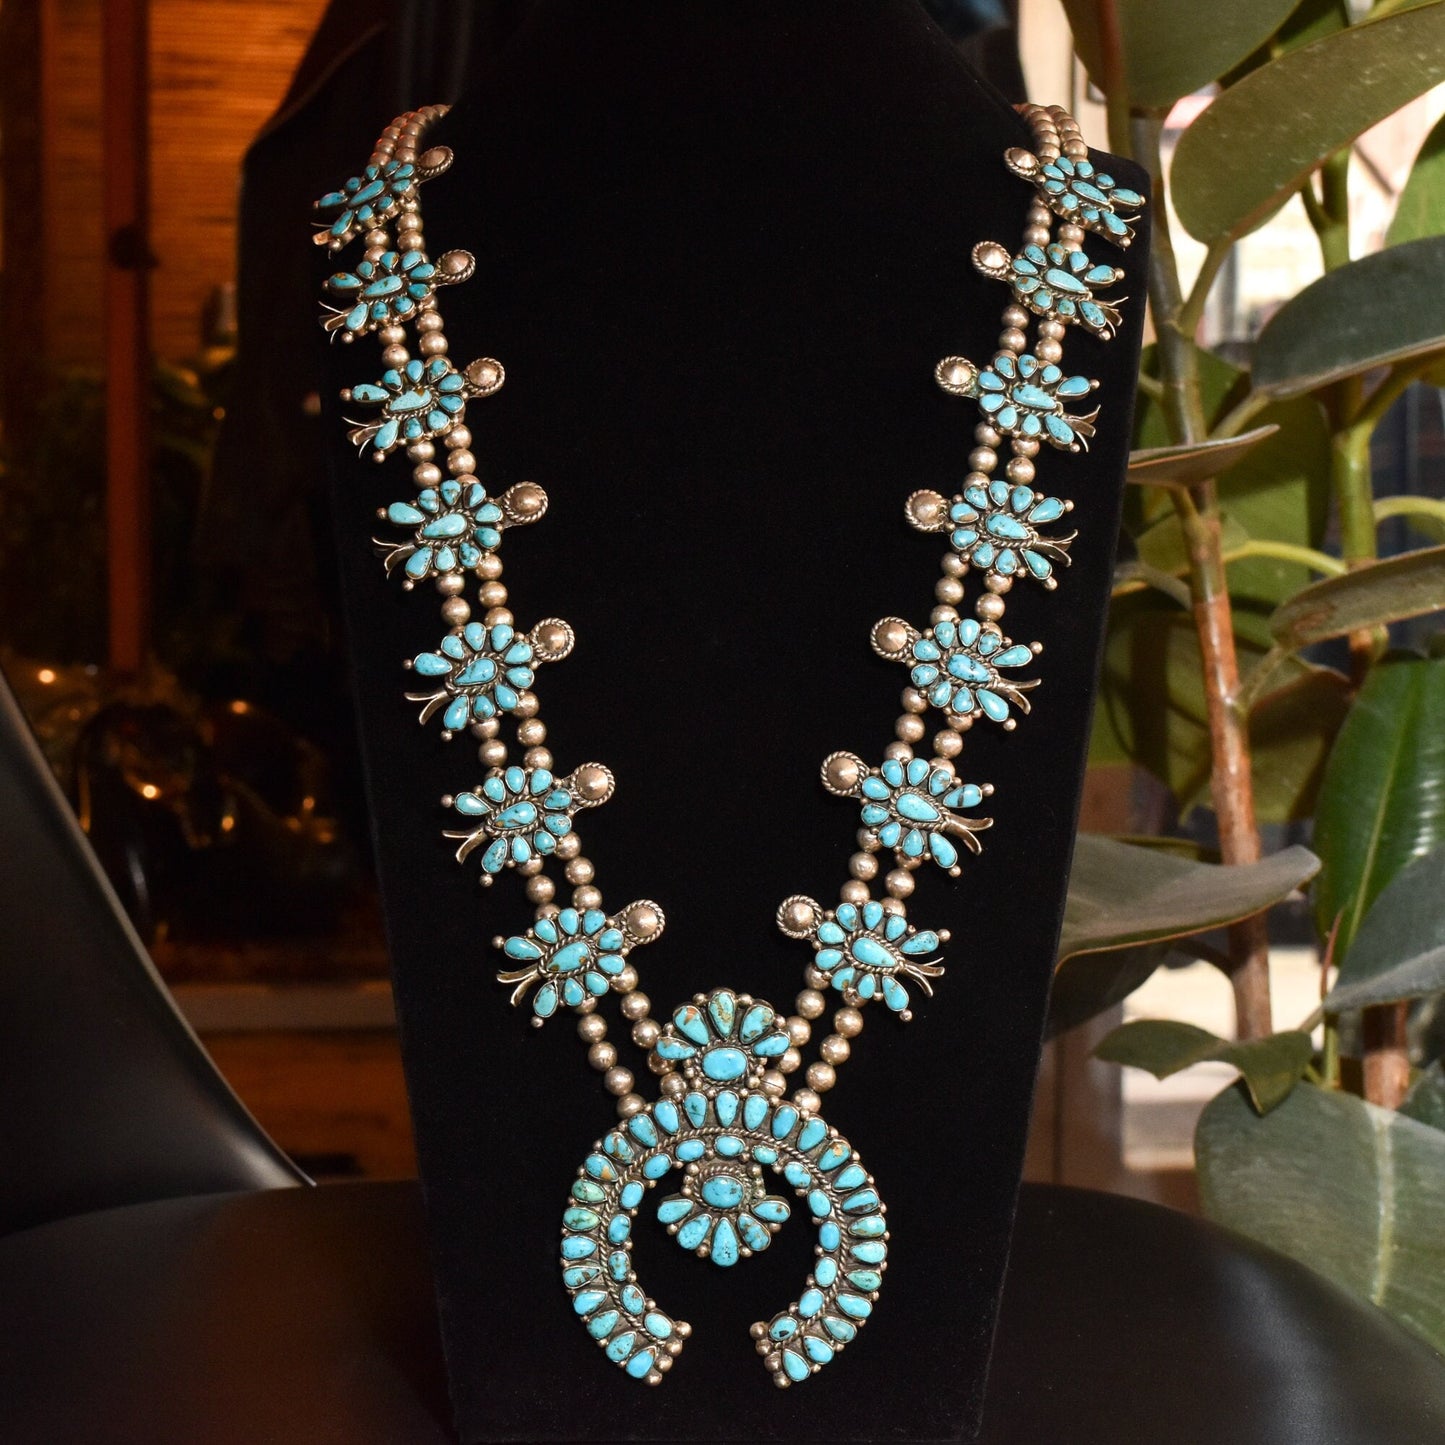 Native American Squash Blossom Necklace, Unsigned, Sterling Silver and Natural Turquoise, Old Pawn Jewelry, 32"